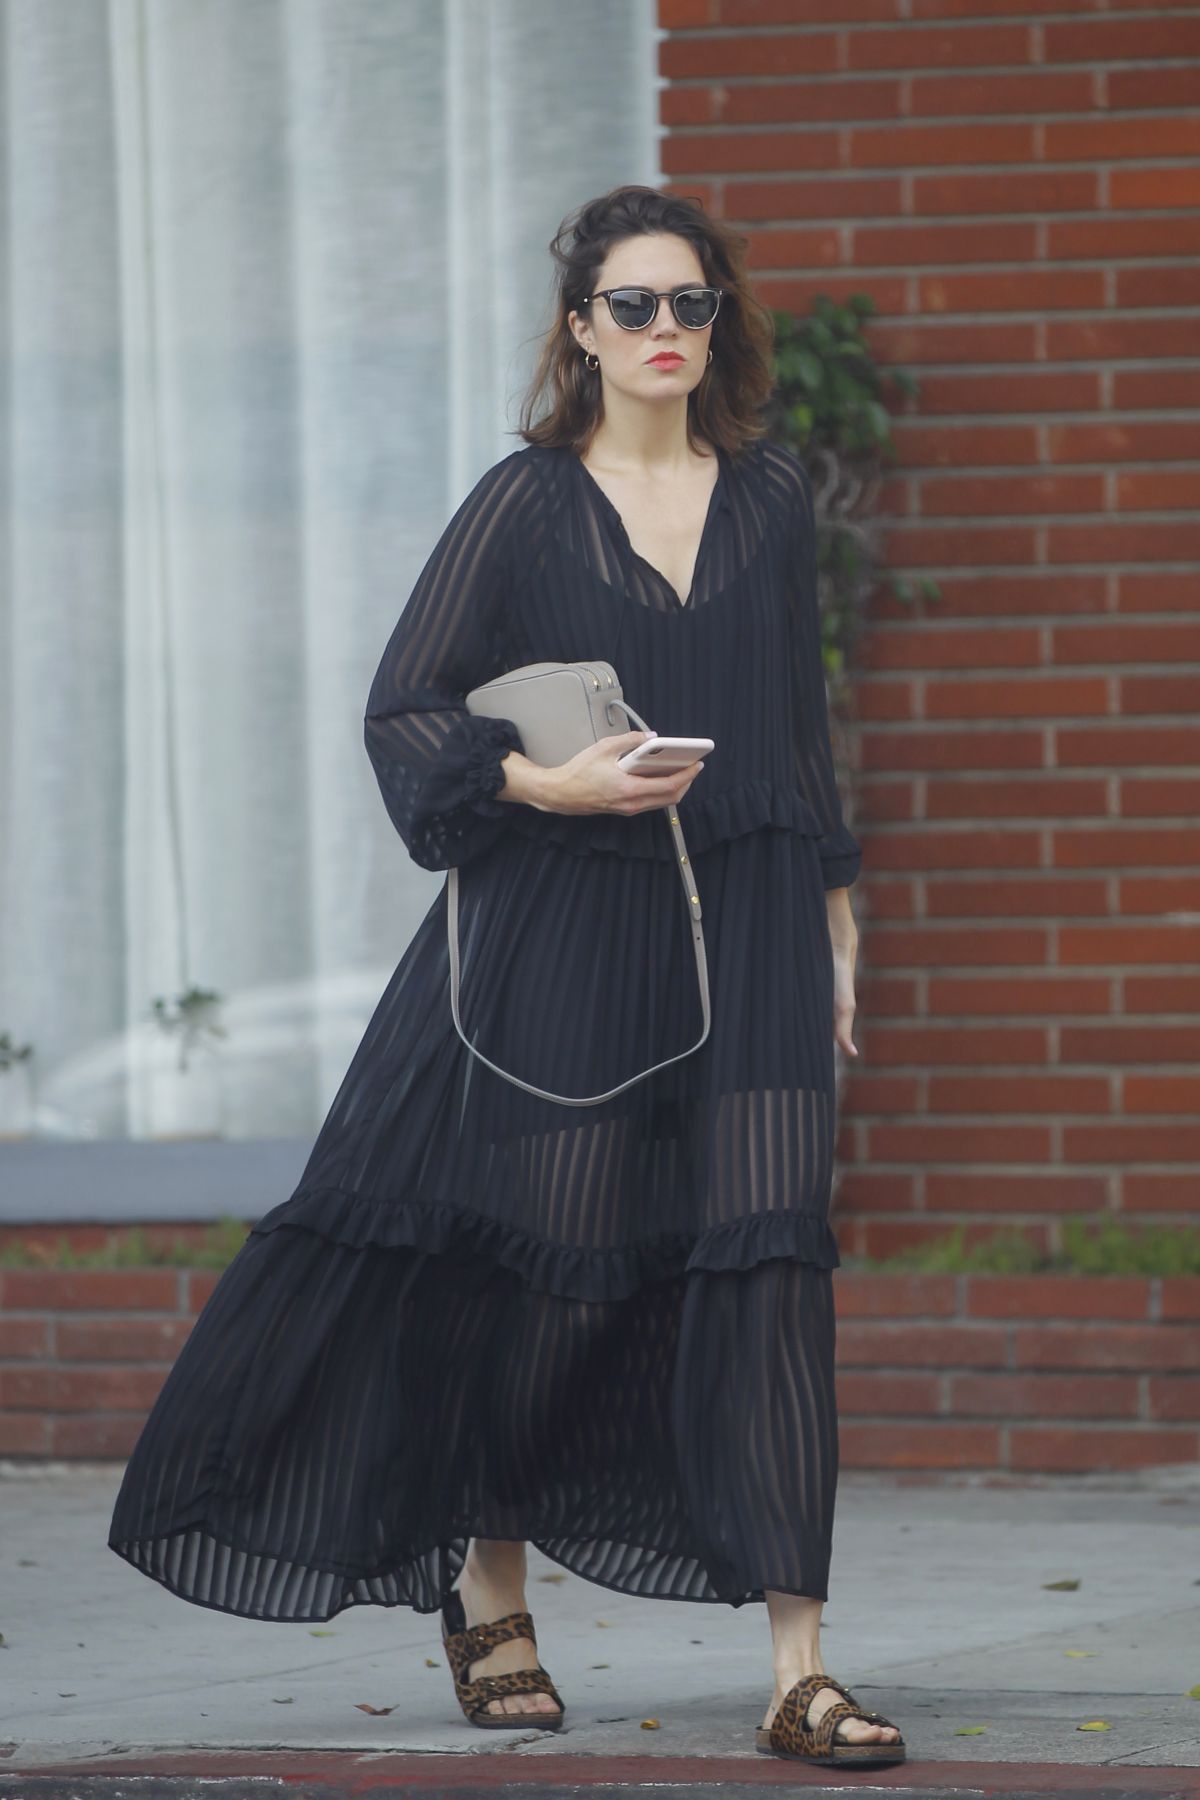 MANDY MOORE Out and About in Los Angeles 09/17/2019 – HawtCelebs